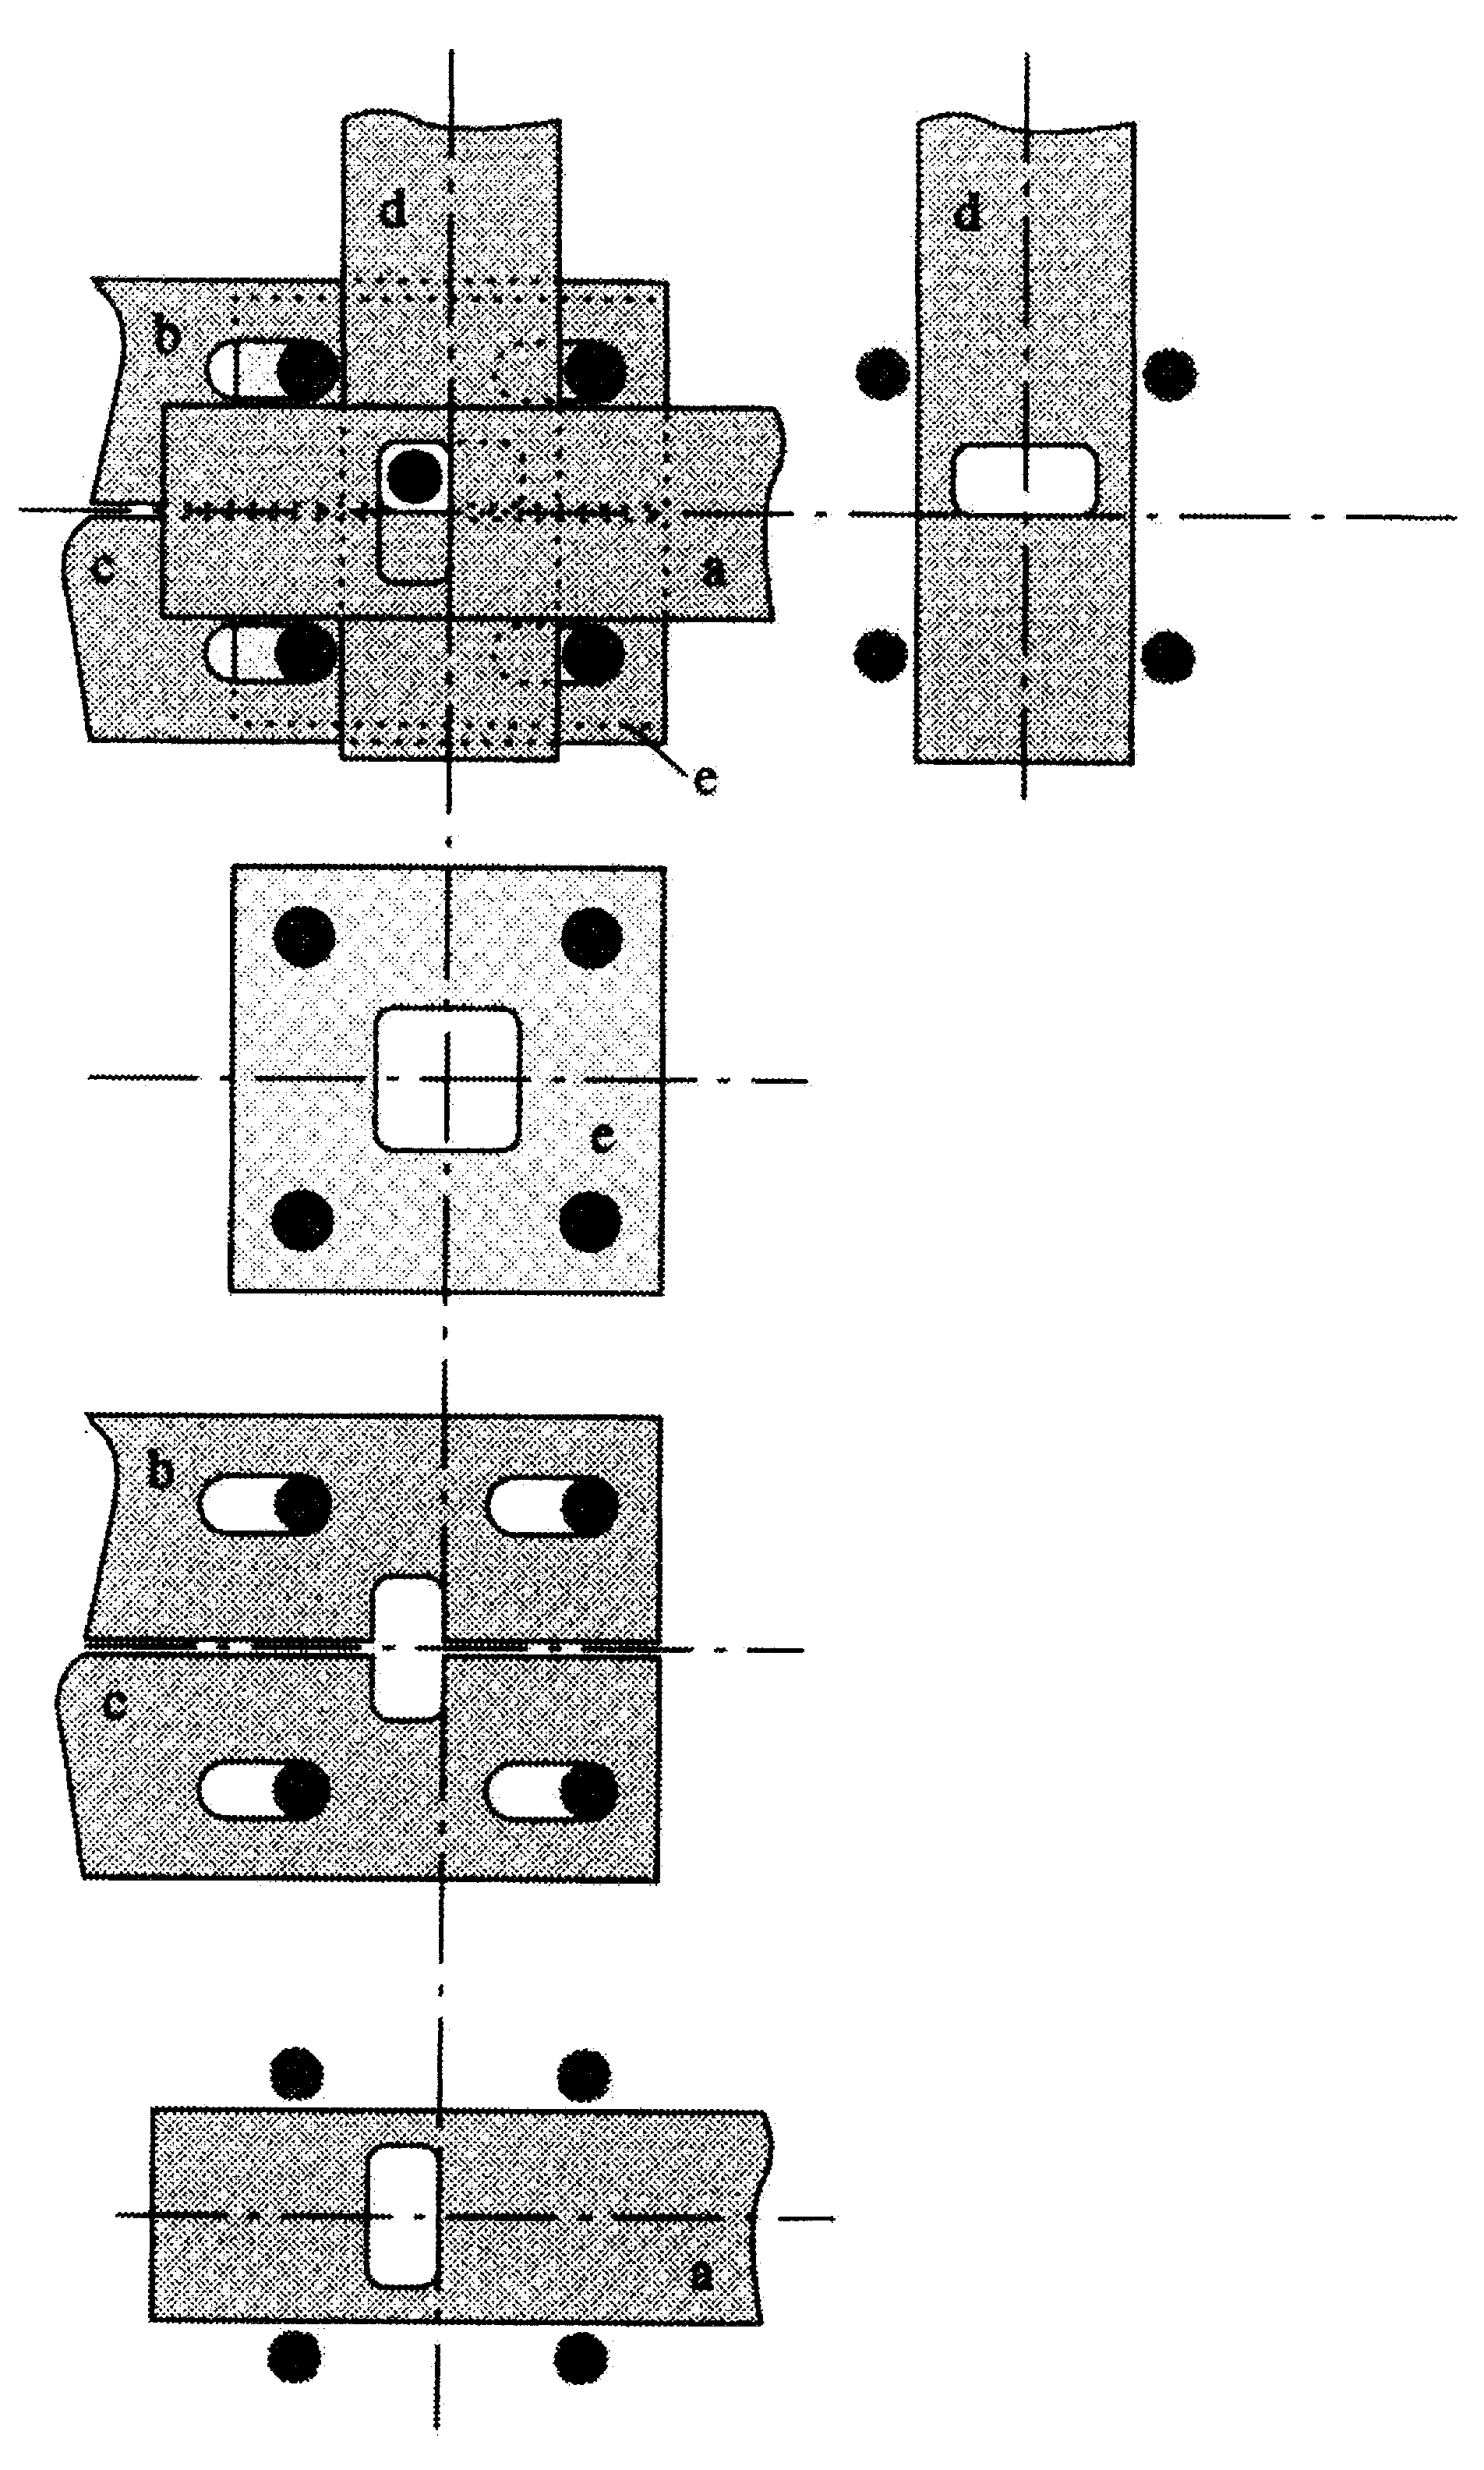 Image 3. Variant of the first switching element, shows plates a to e stacked together and separate